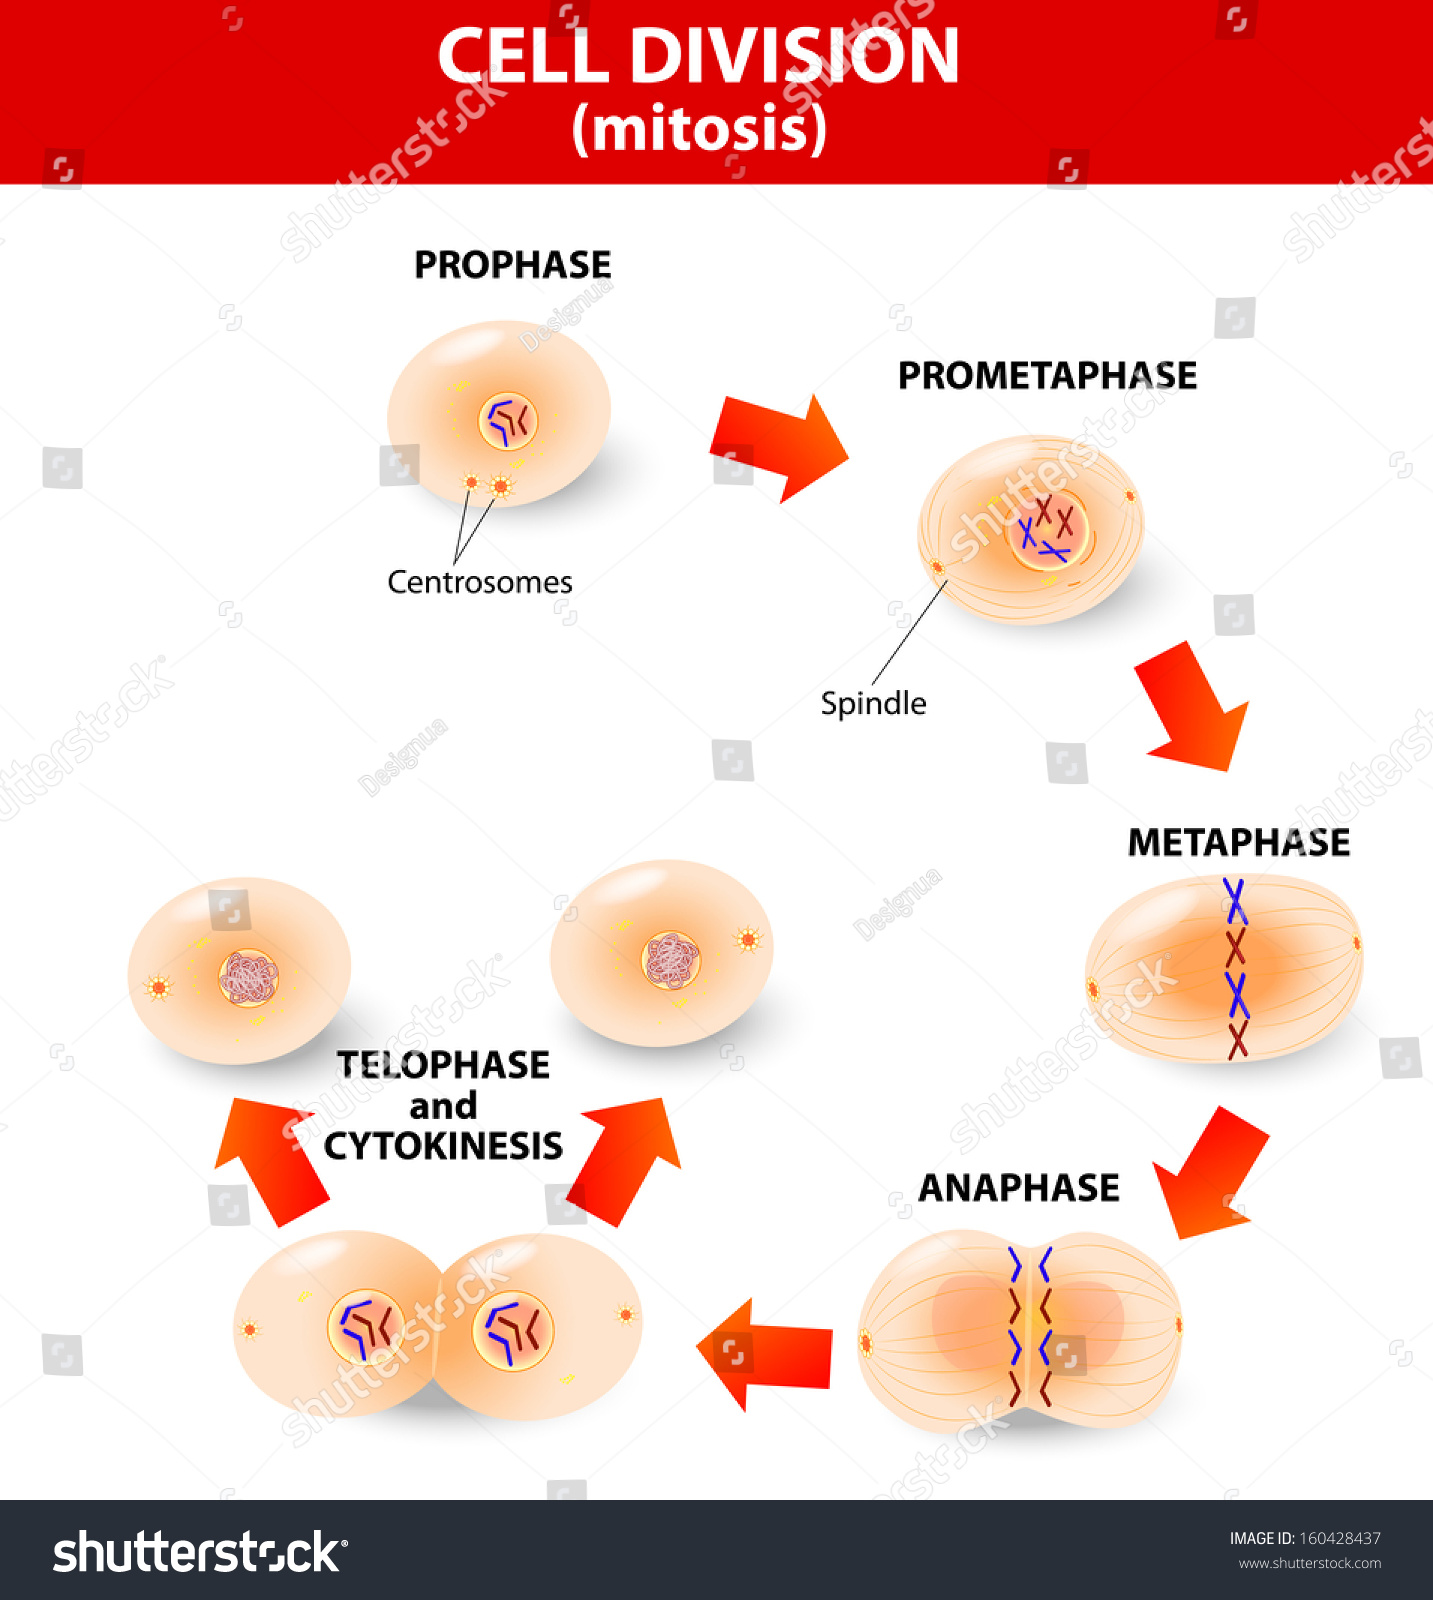 Mitosis Process By Which Our Bodies Stock Vector 160428437 - Shutterstock